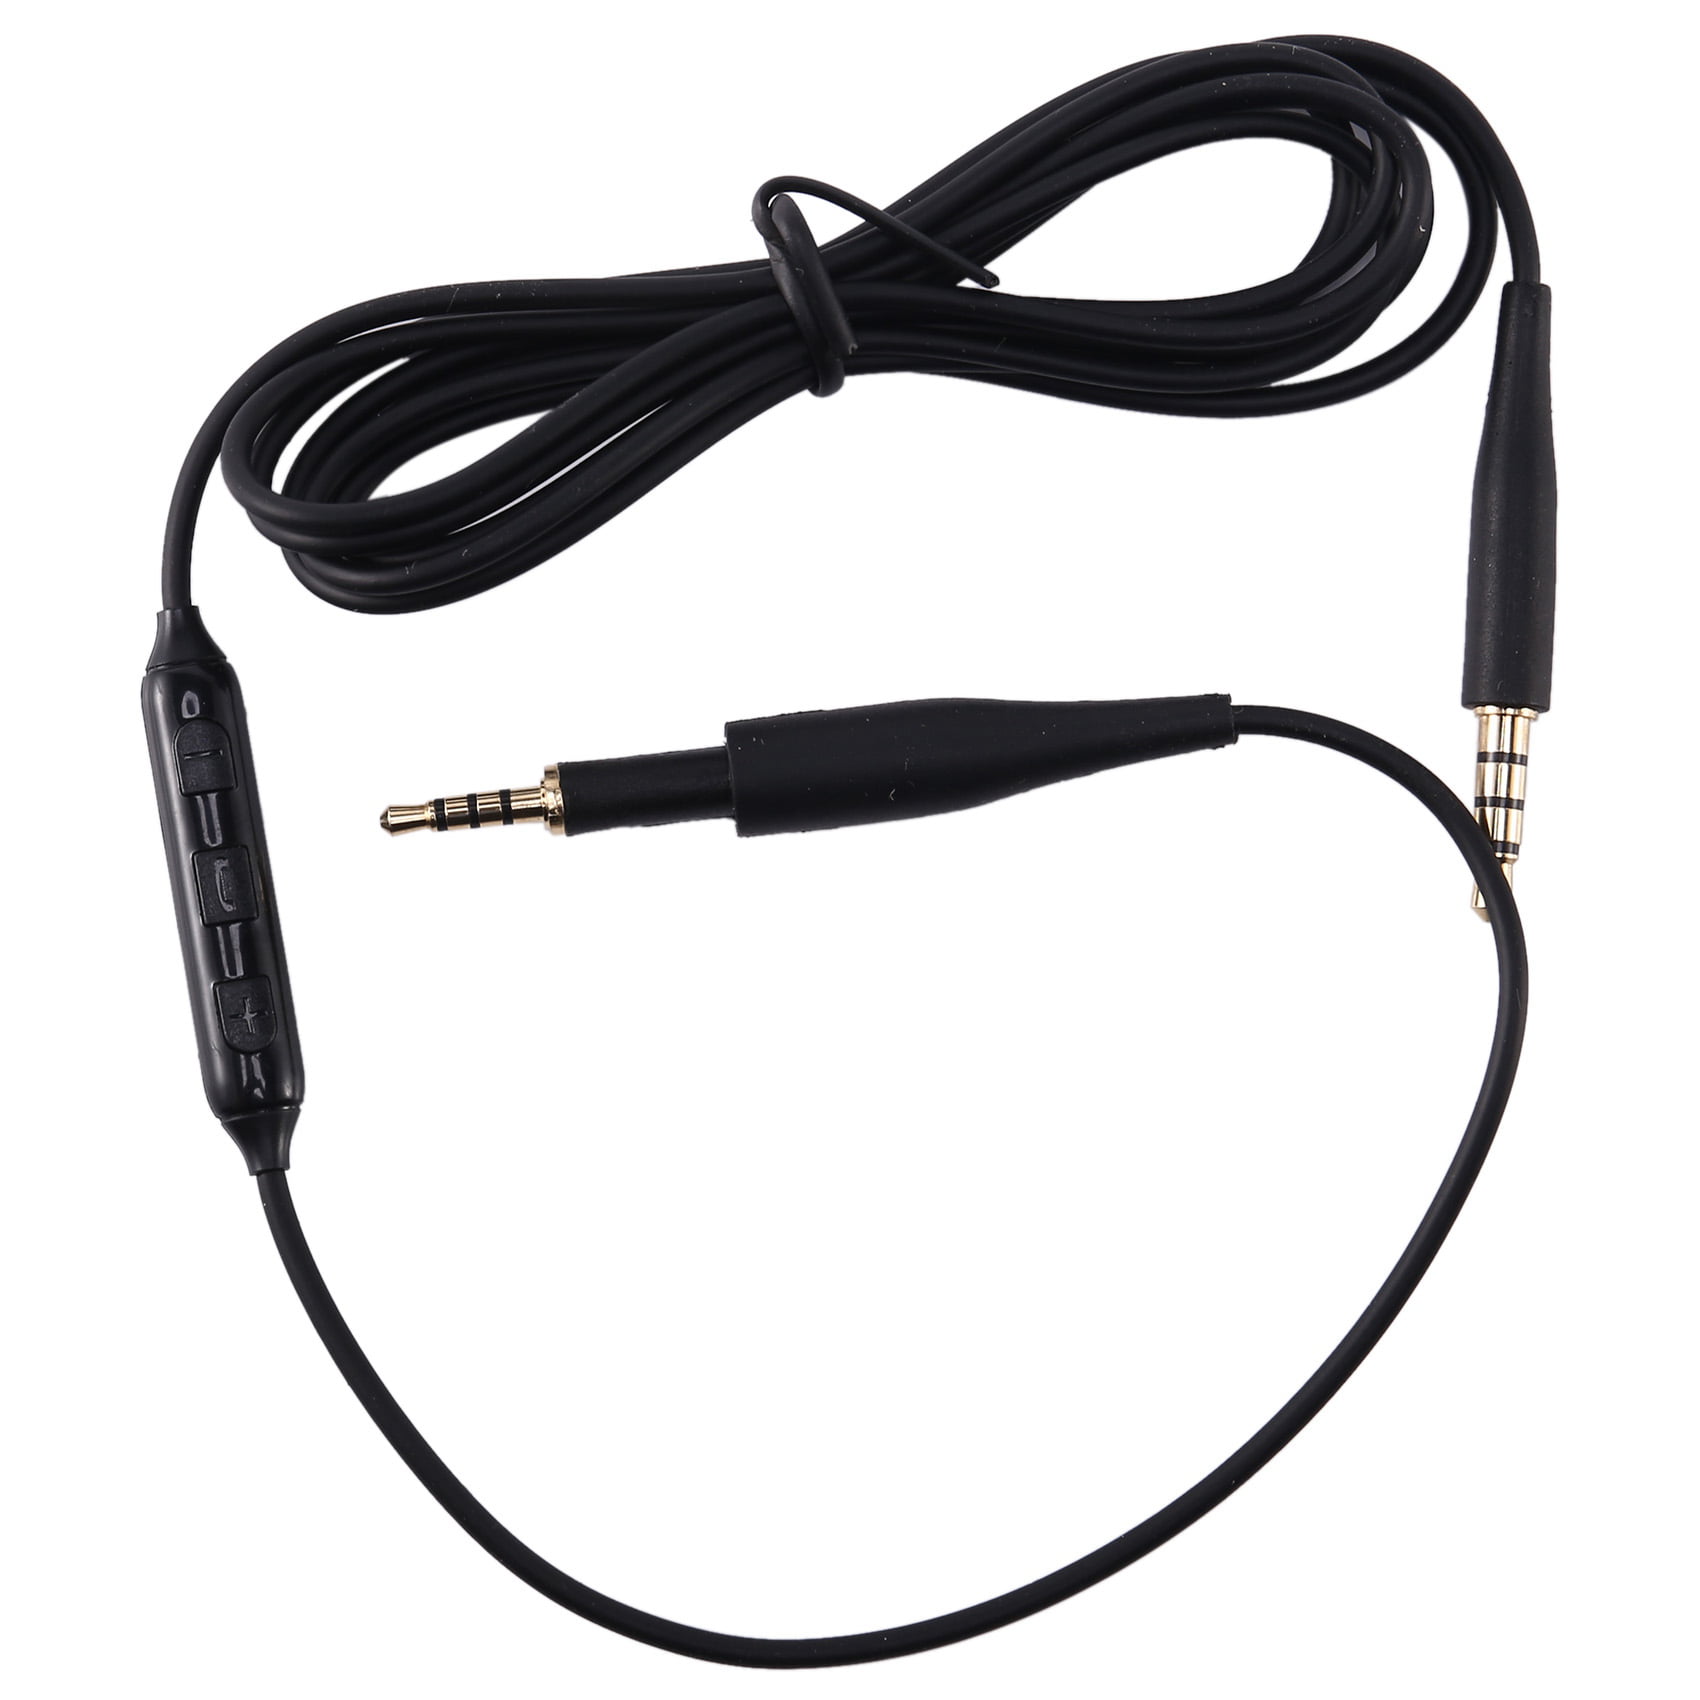 3.5MM 1/8" AUDIO CABLE AUX CARD WITH INLINE MIC FOR JBL J88i ON-EAR HEADPHONES 